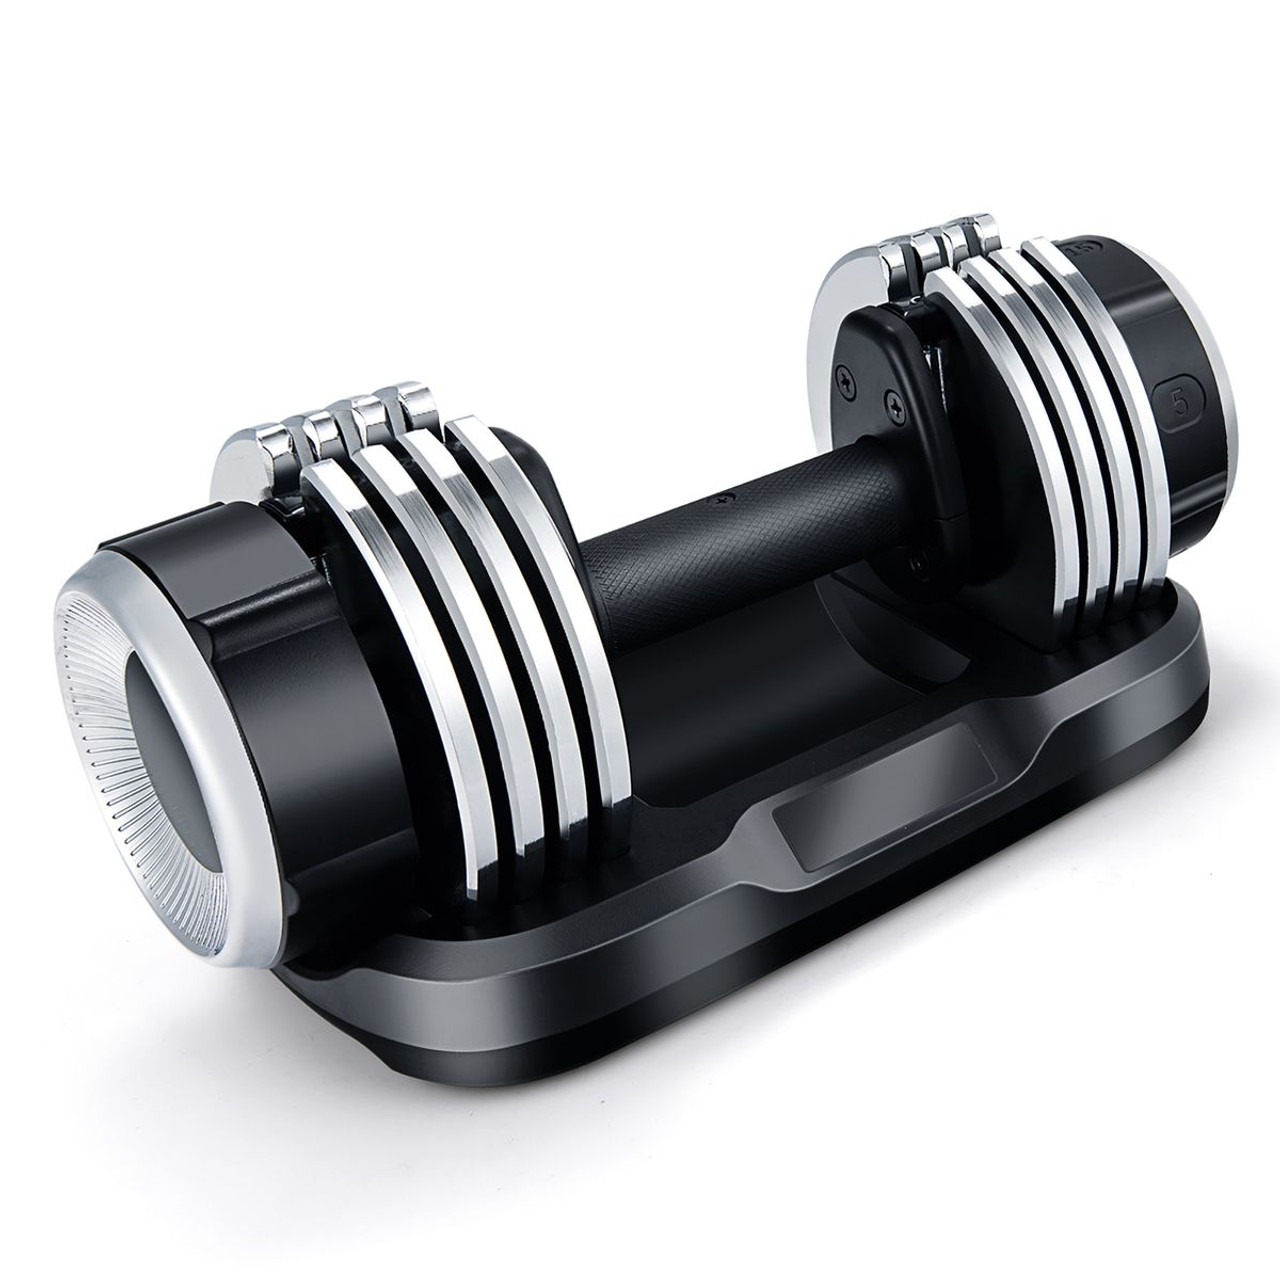 5-in-1 Weight Adjustable Dumbbell with Anti-Slip Fast Adjust Turning Handle product image